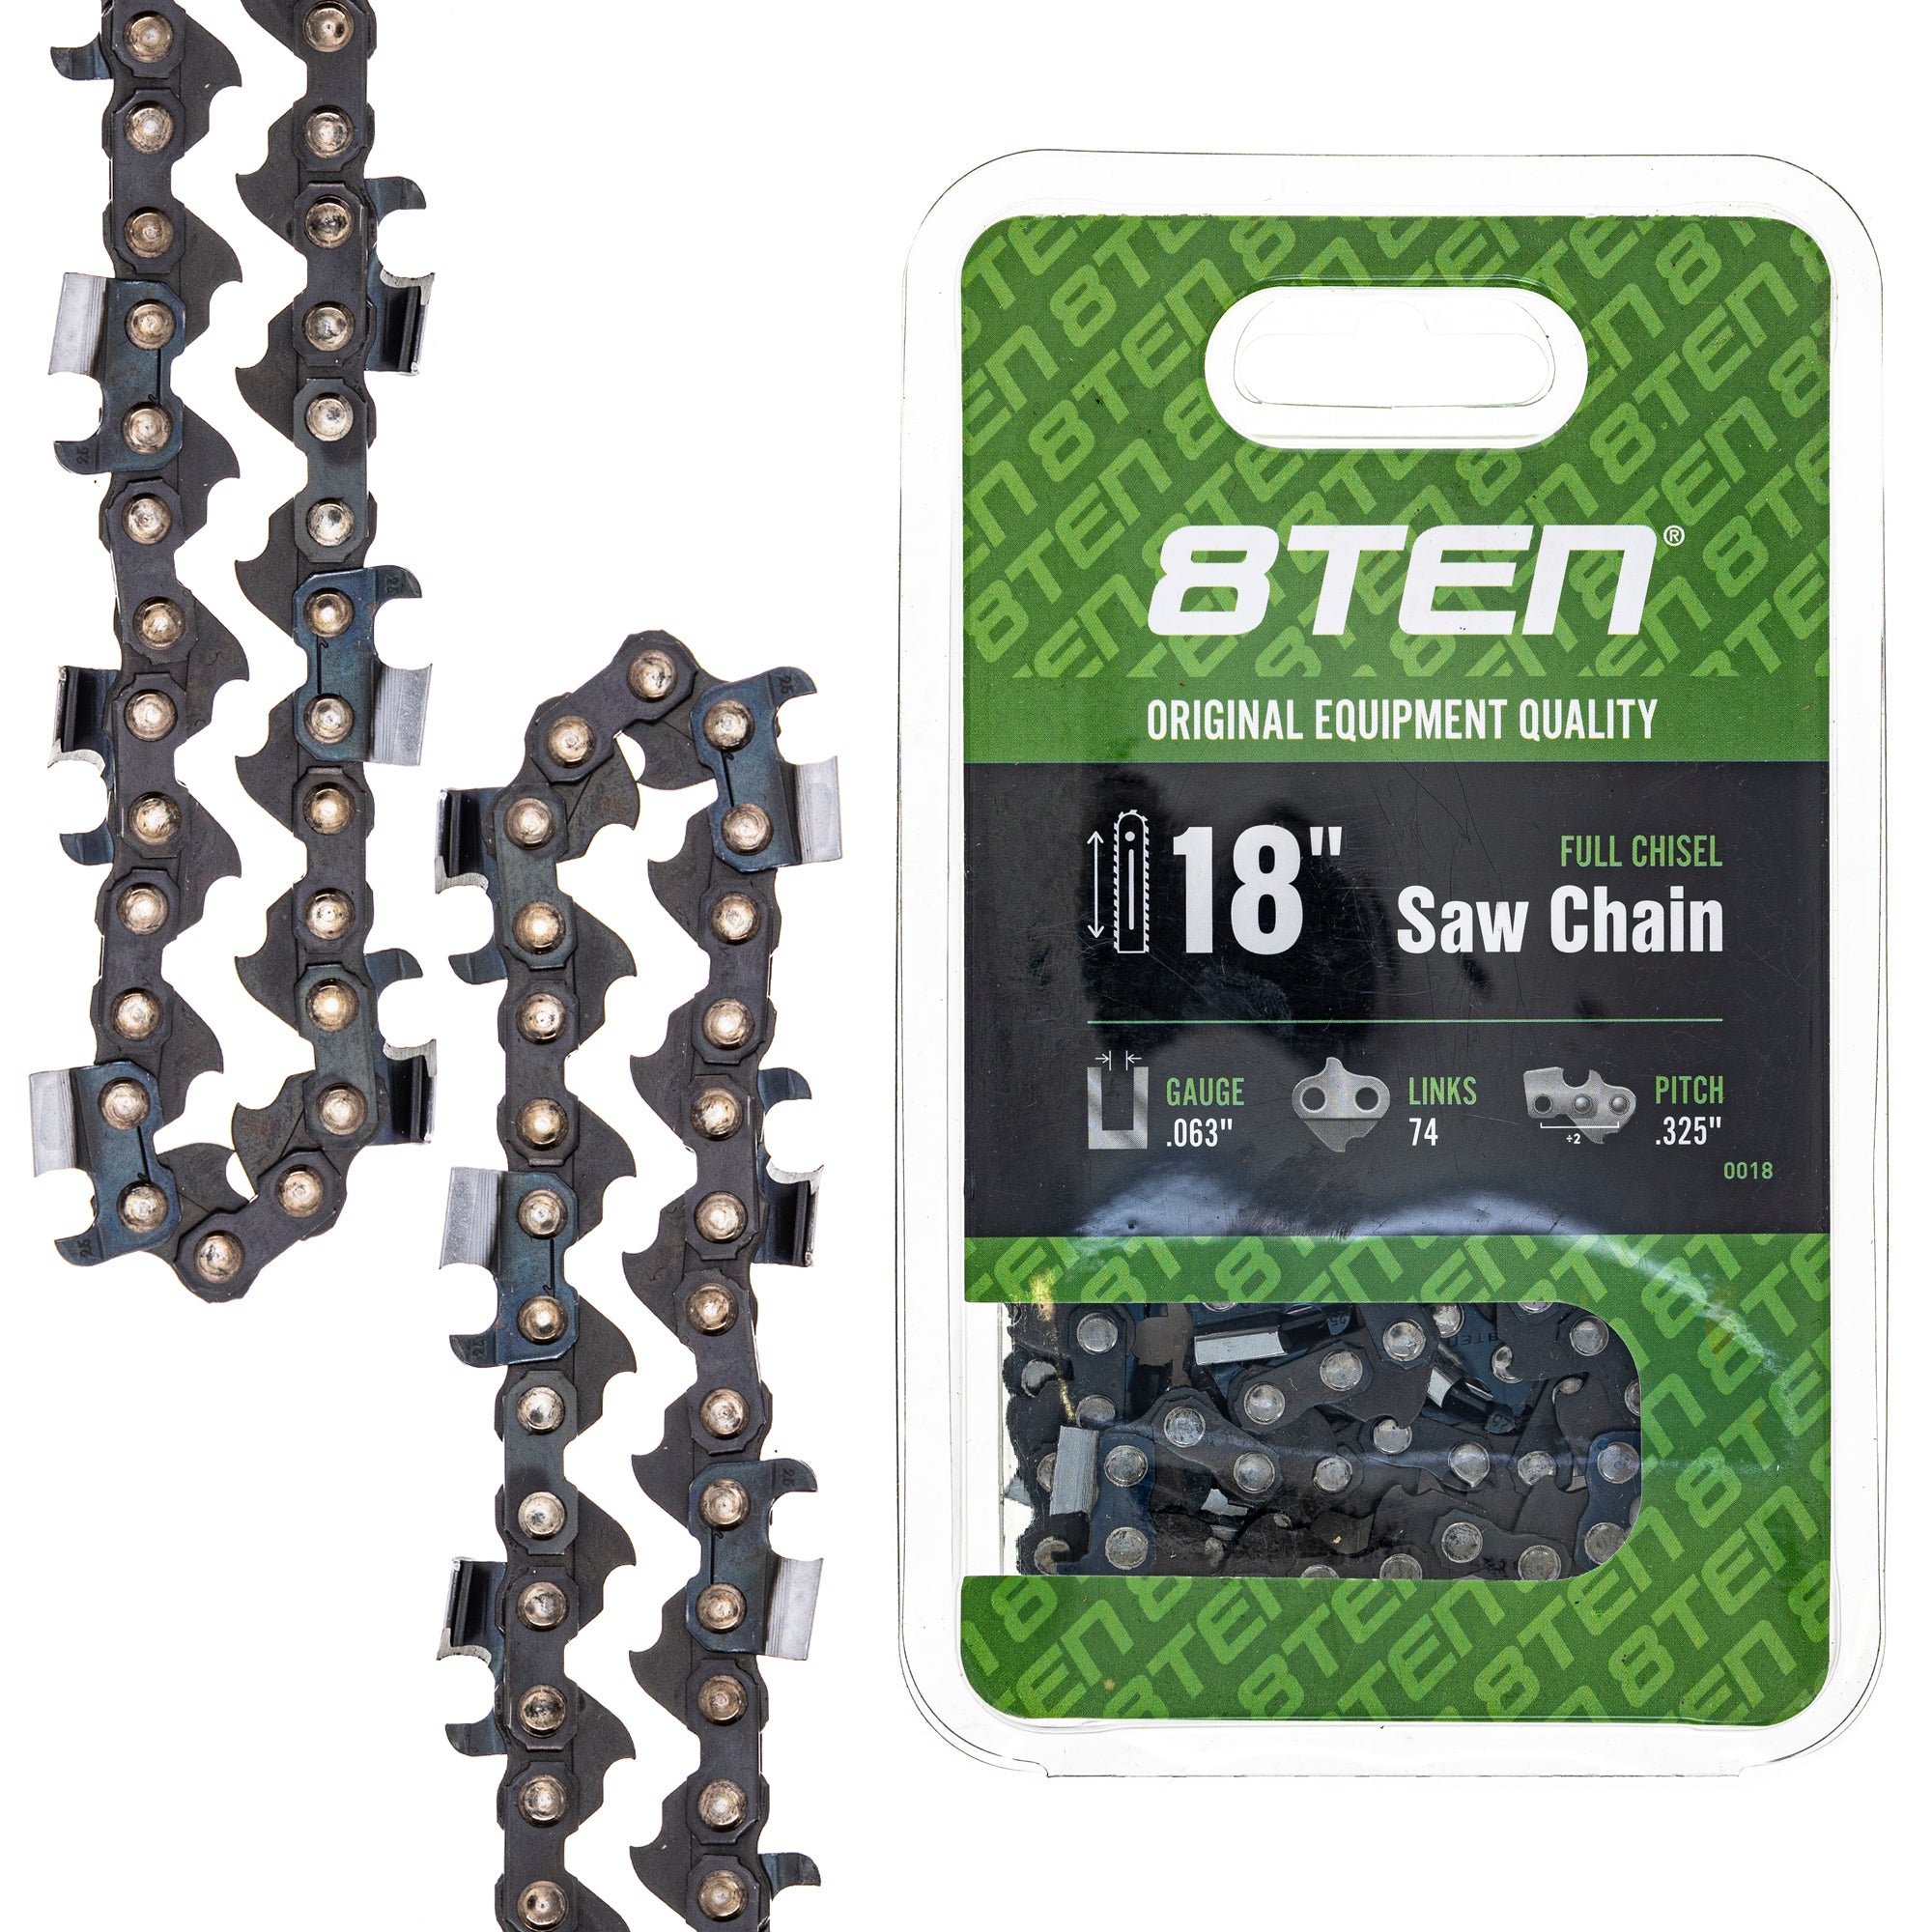 Chainsaw Chain 18 Inch .063 .325 74DL for zOTHER Stens Oregon GB MSE MS E 34 K3L-74E 8TEN 810-CCC2230H